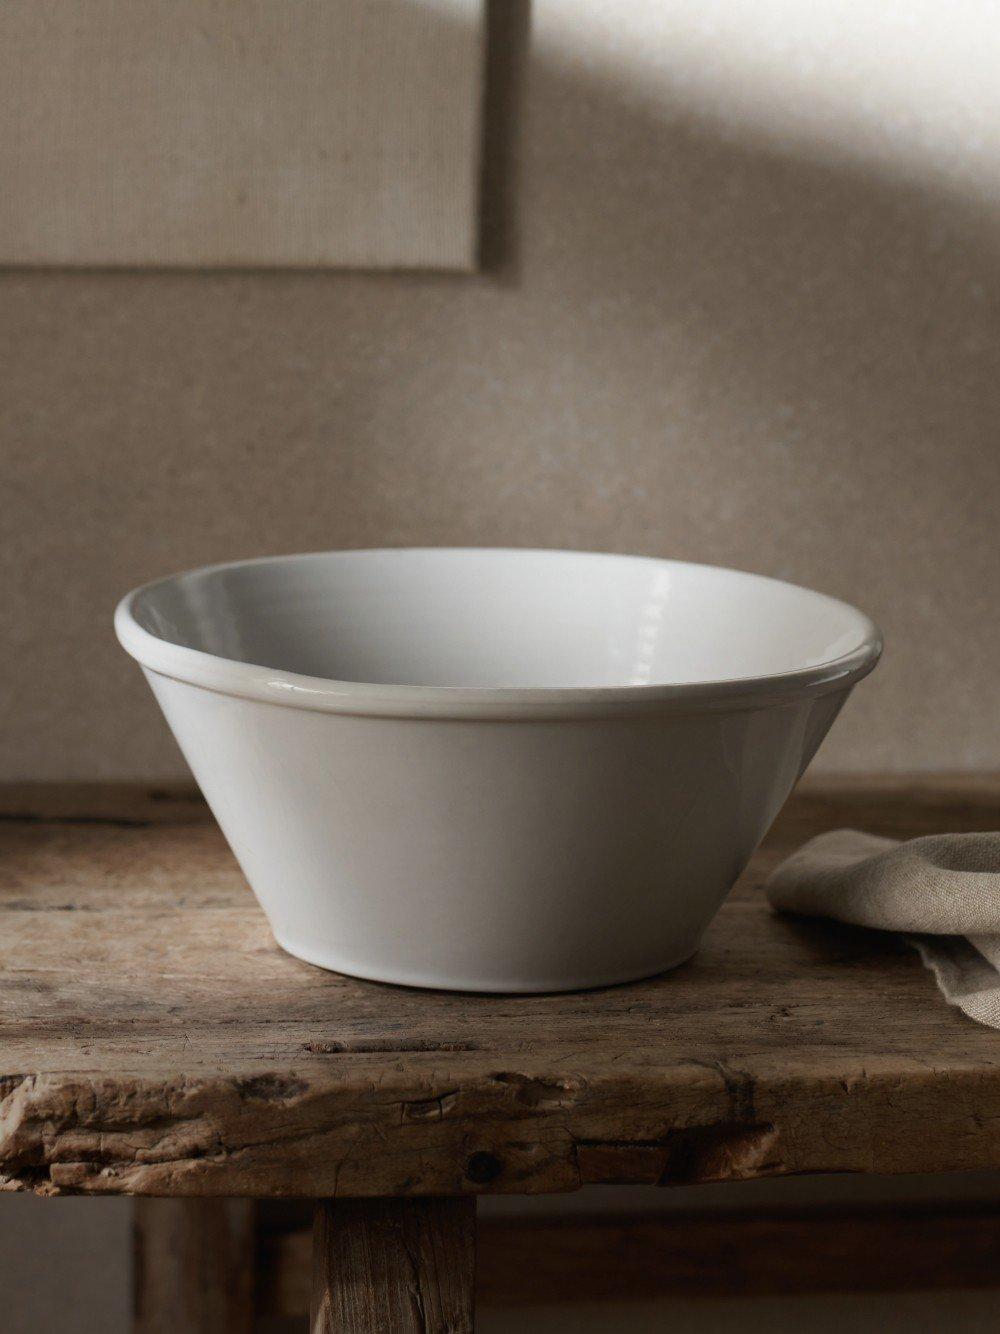 a white bowl sitting on a wooden table next to a towel